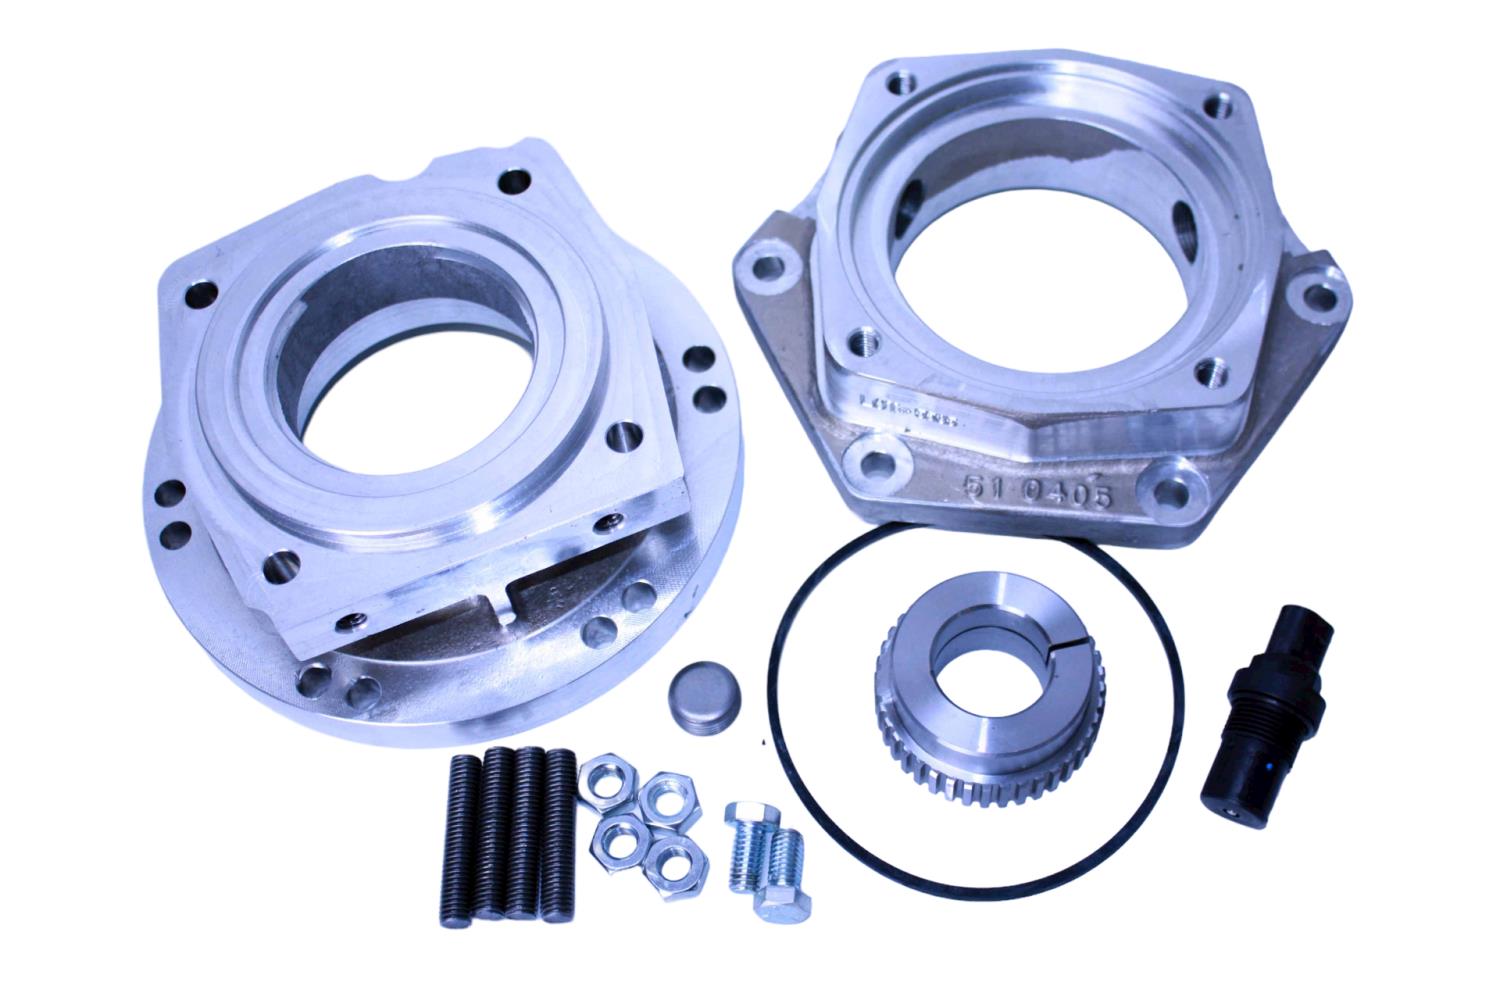 AS-9300 Transmission Adapter, 4L60E Hex Pattern To Atlas Adapter